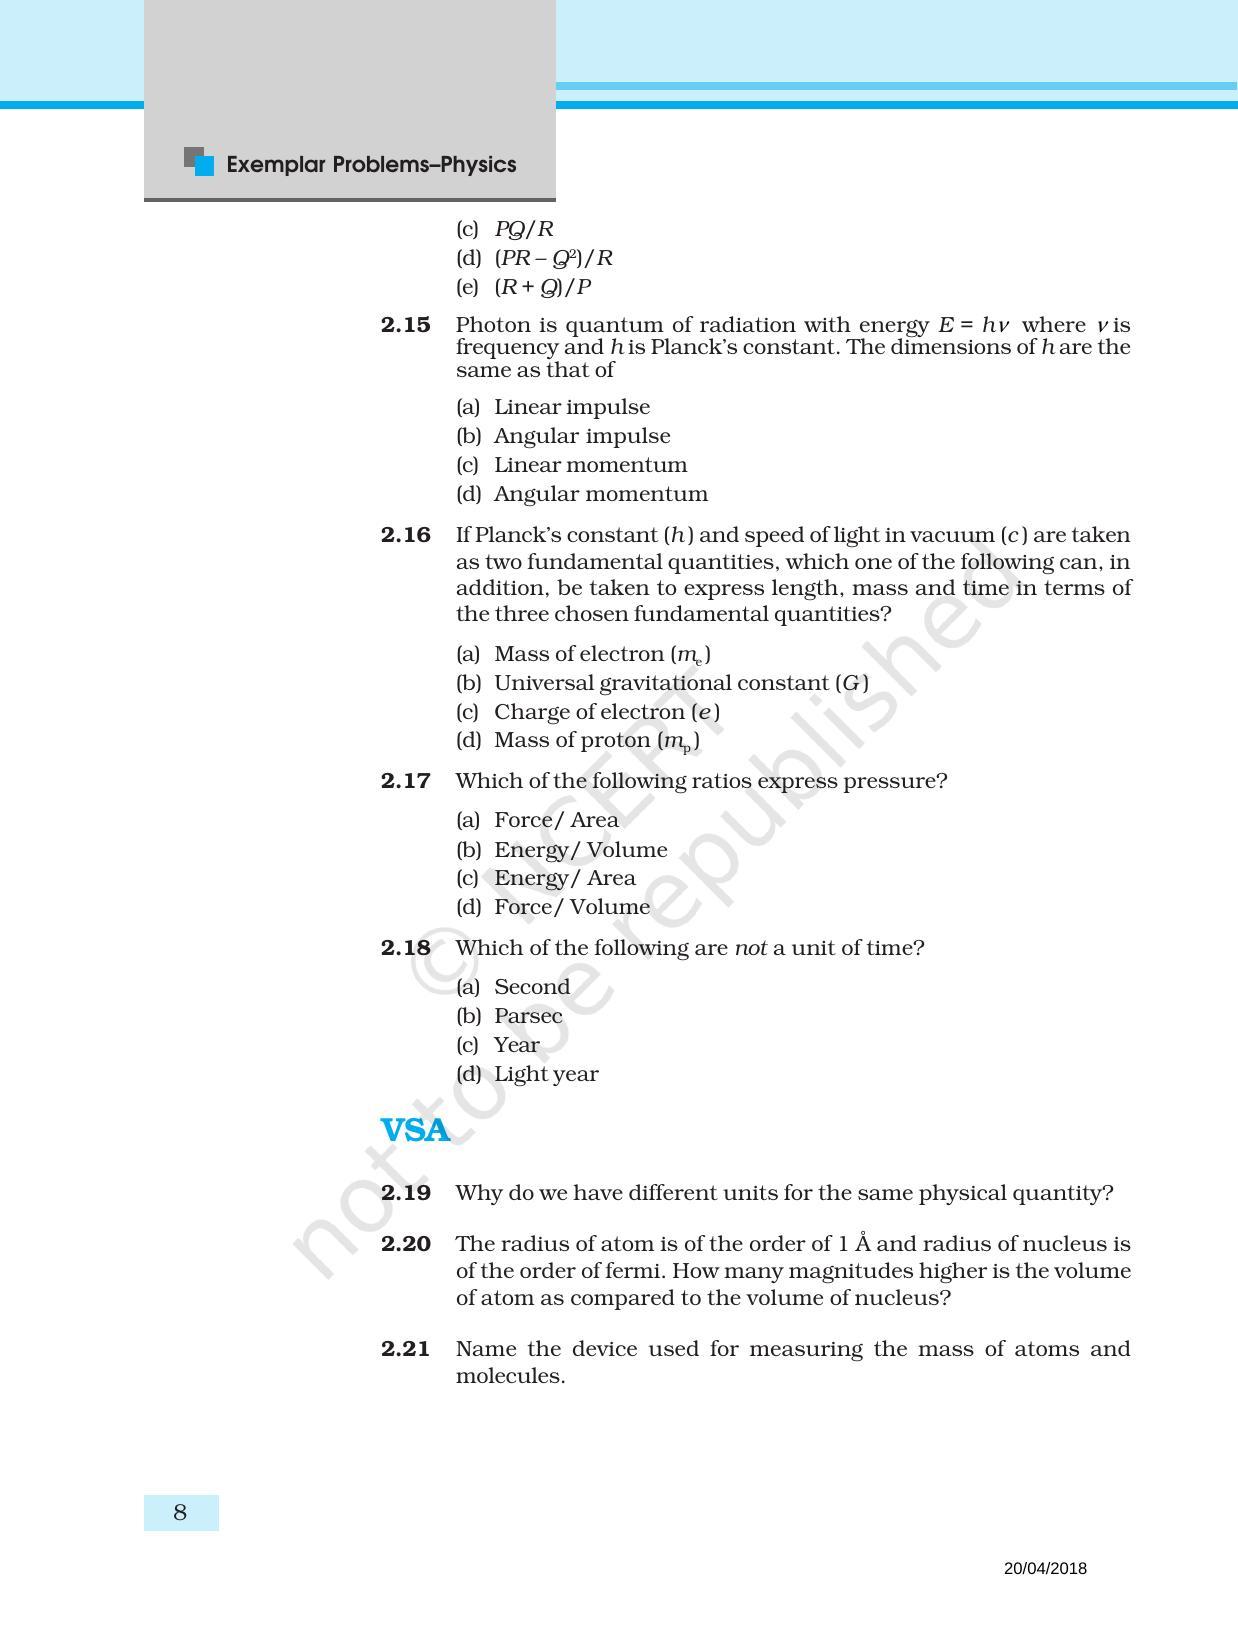 NCERT Exemplar Book for Class 11 Physics: Chapter 1 Units and Measurements - Page 4